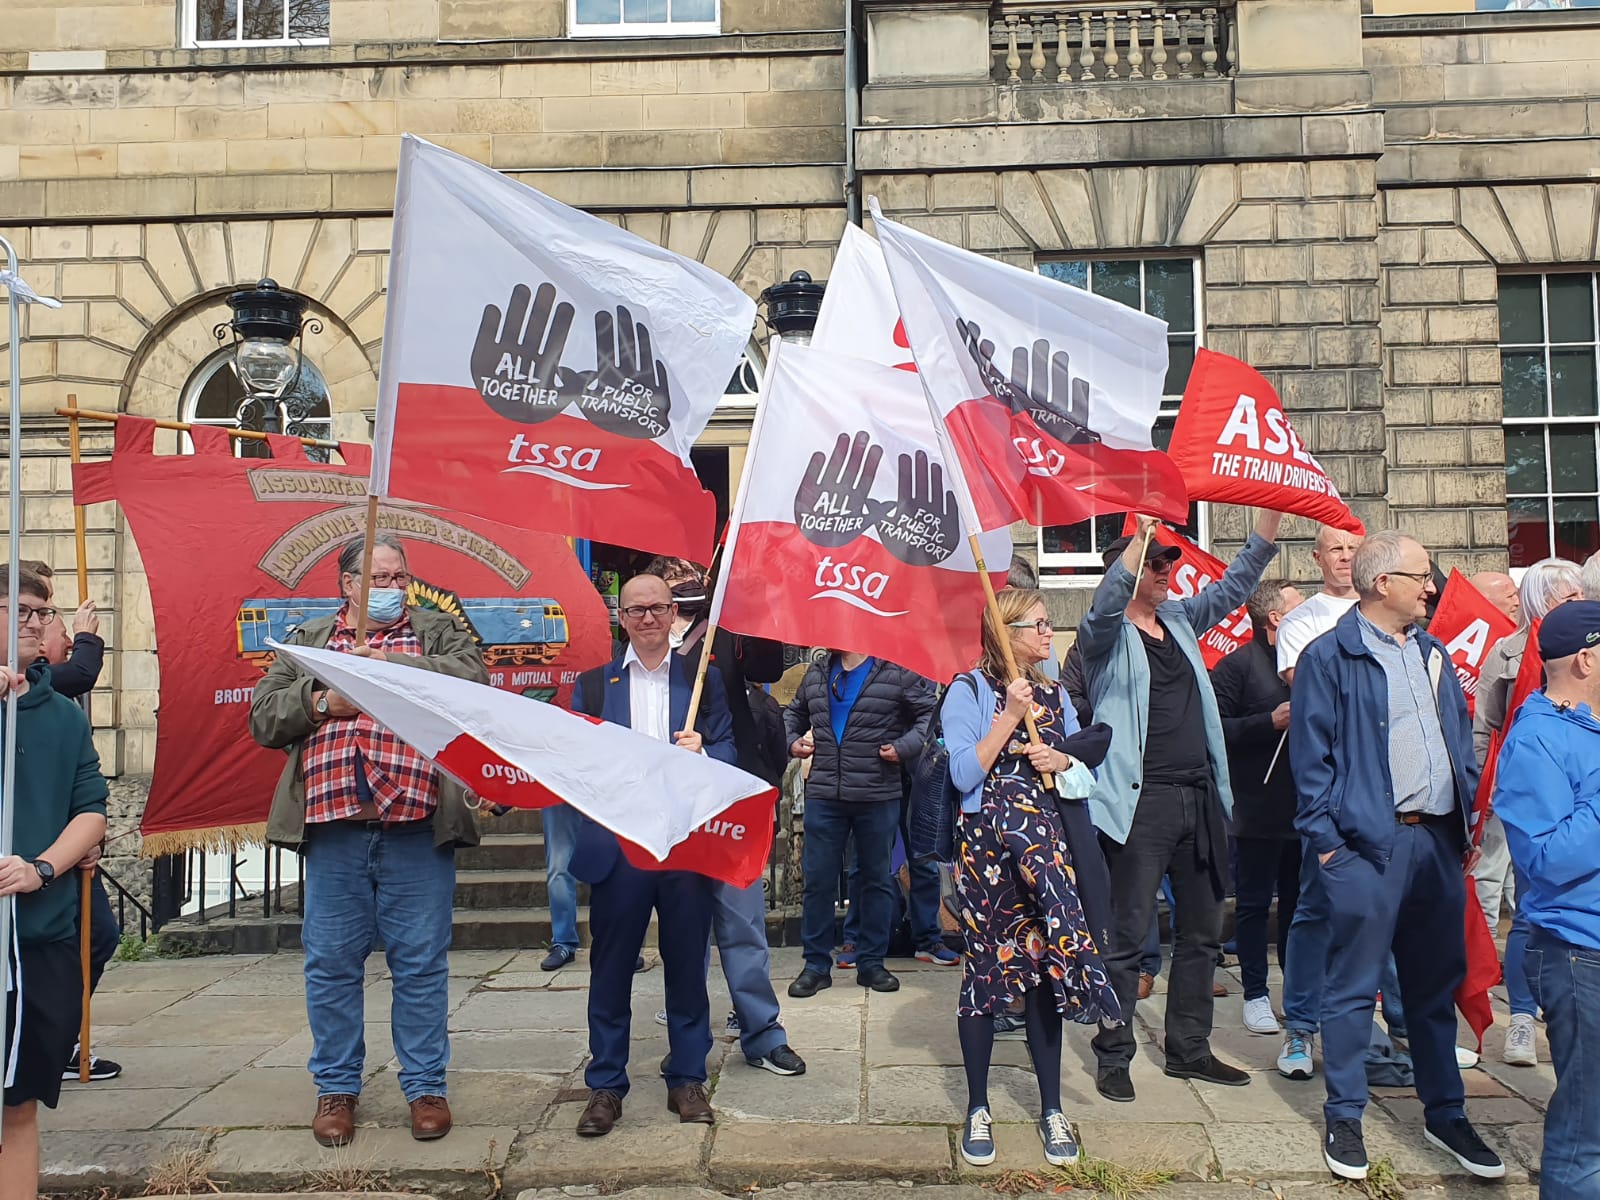 Protestors hold TSSA banners at Save our ScotRail demo  - credit Liz WC